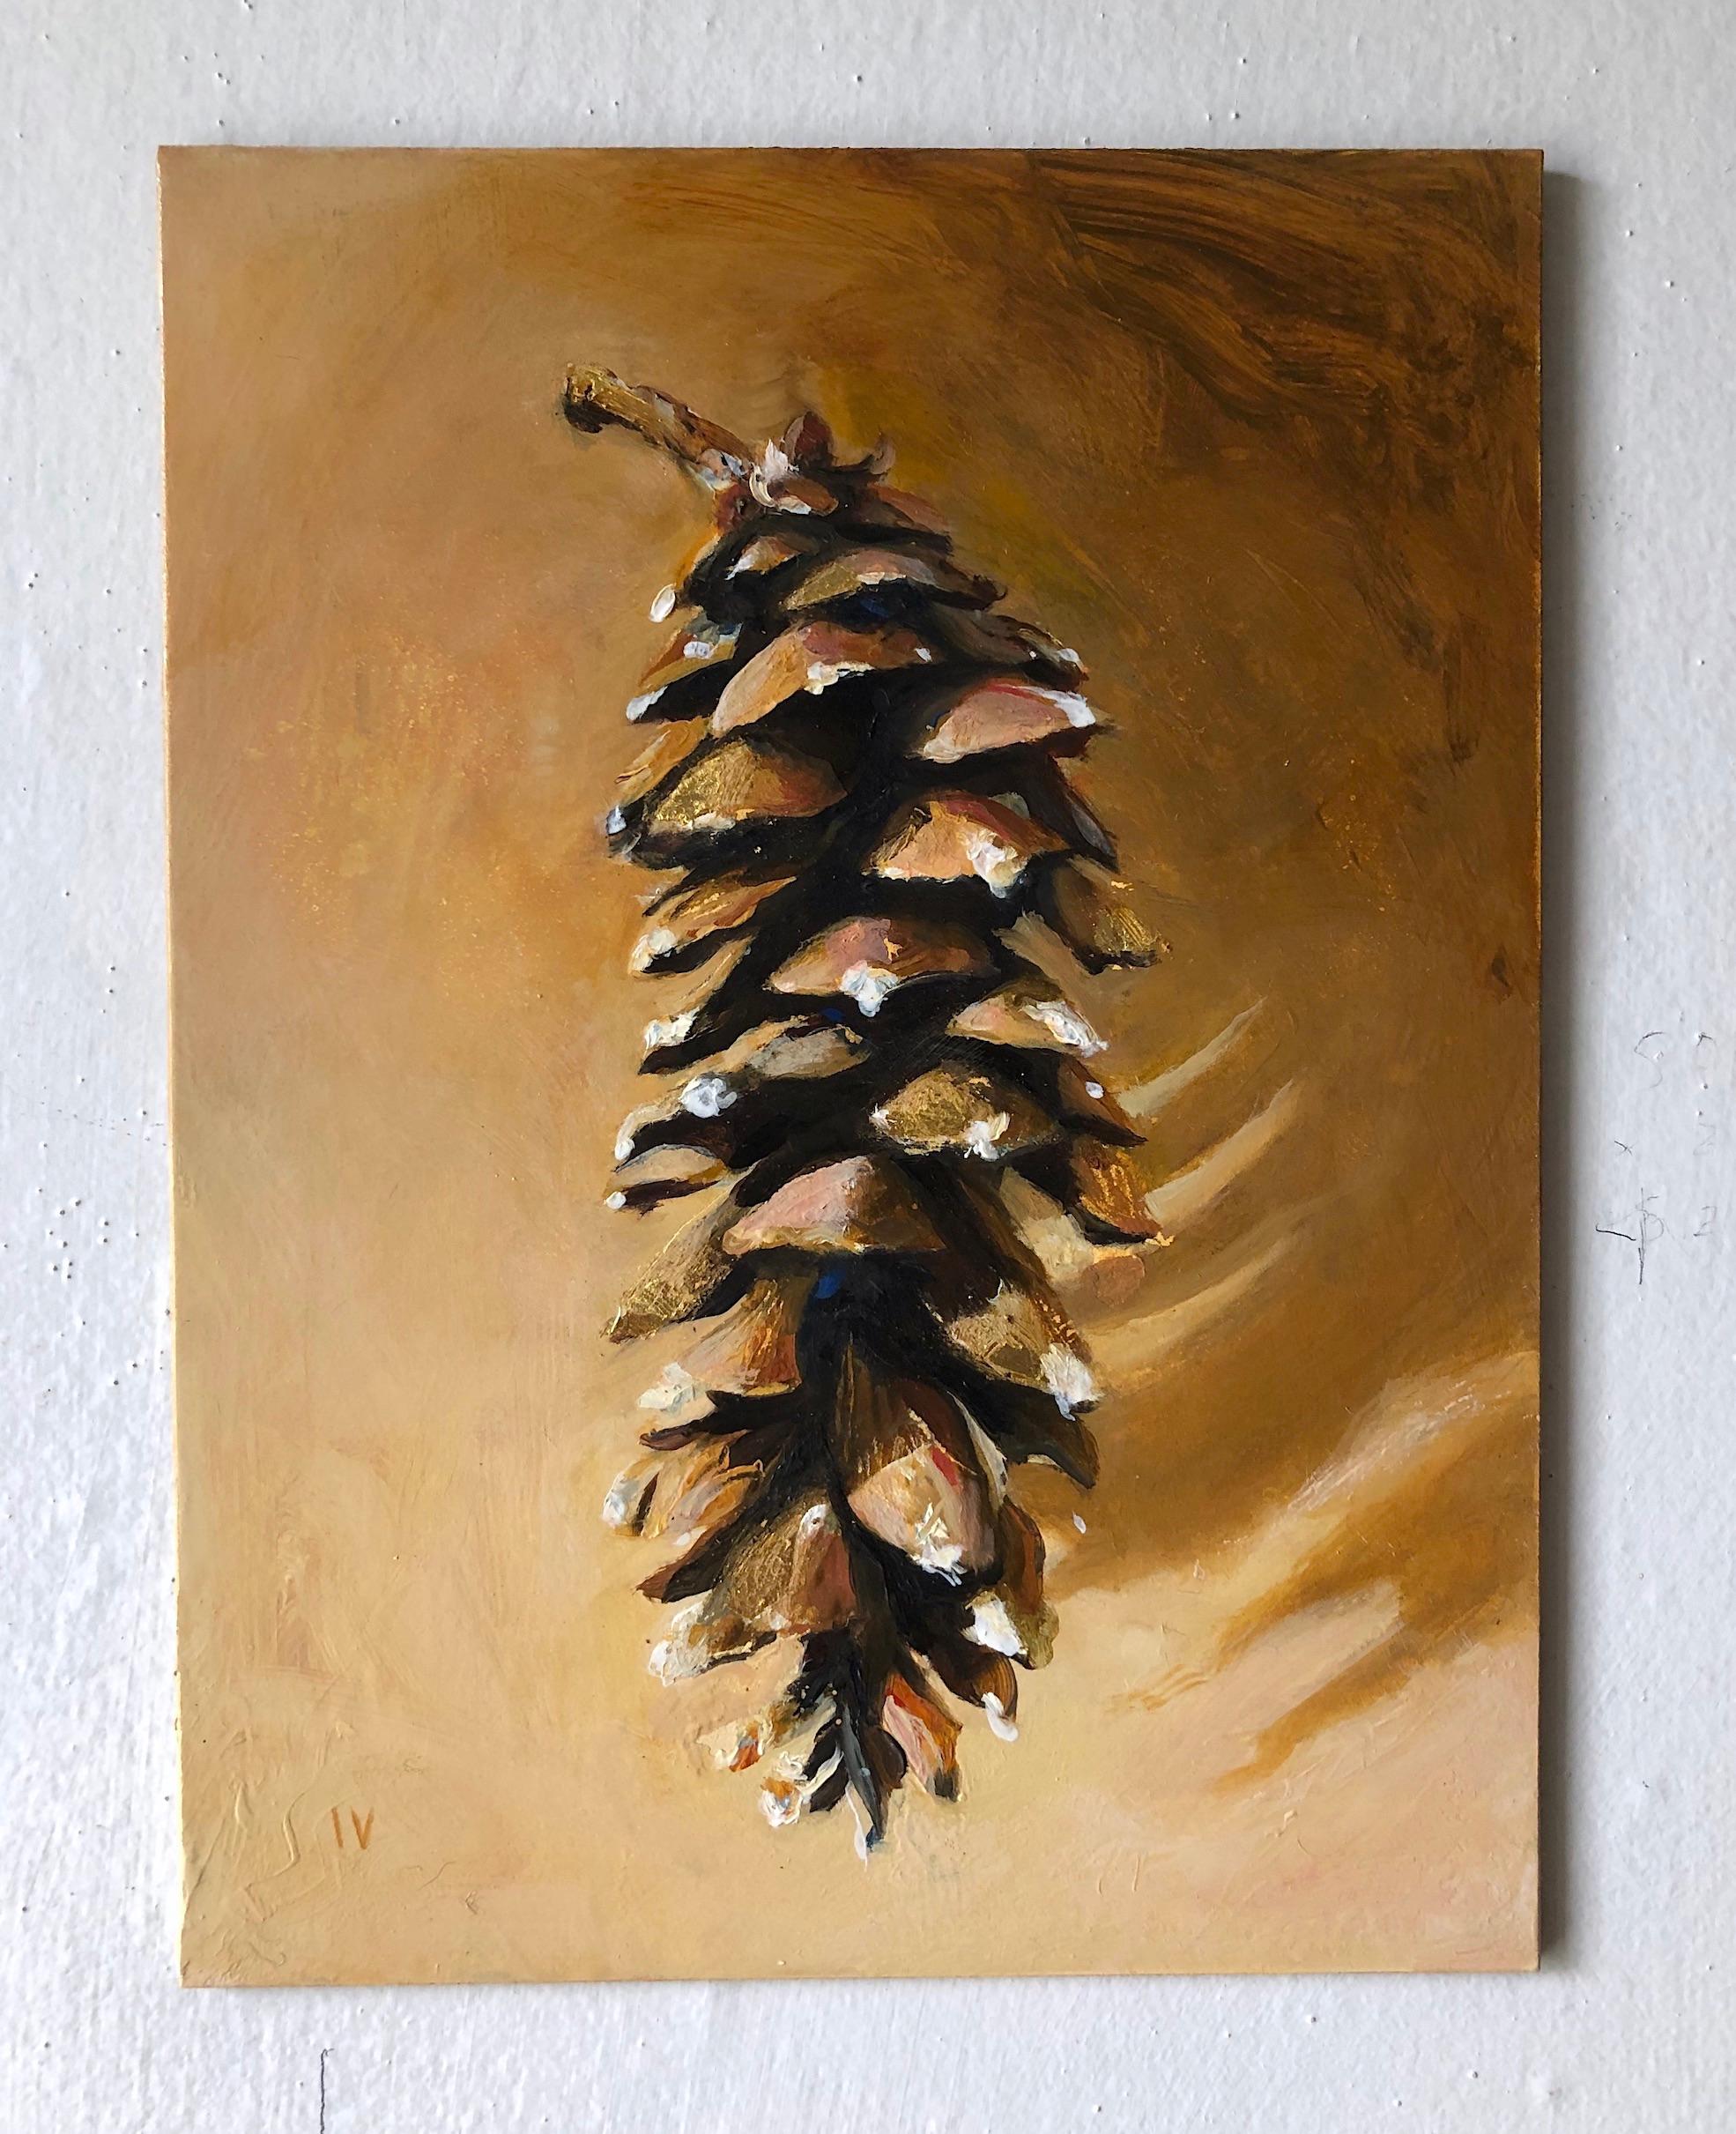 Pinecone #5 (Contemporary Realist Still Life Painting of Pinecone w/ Gold Leaf) 2